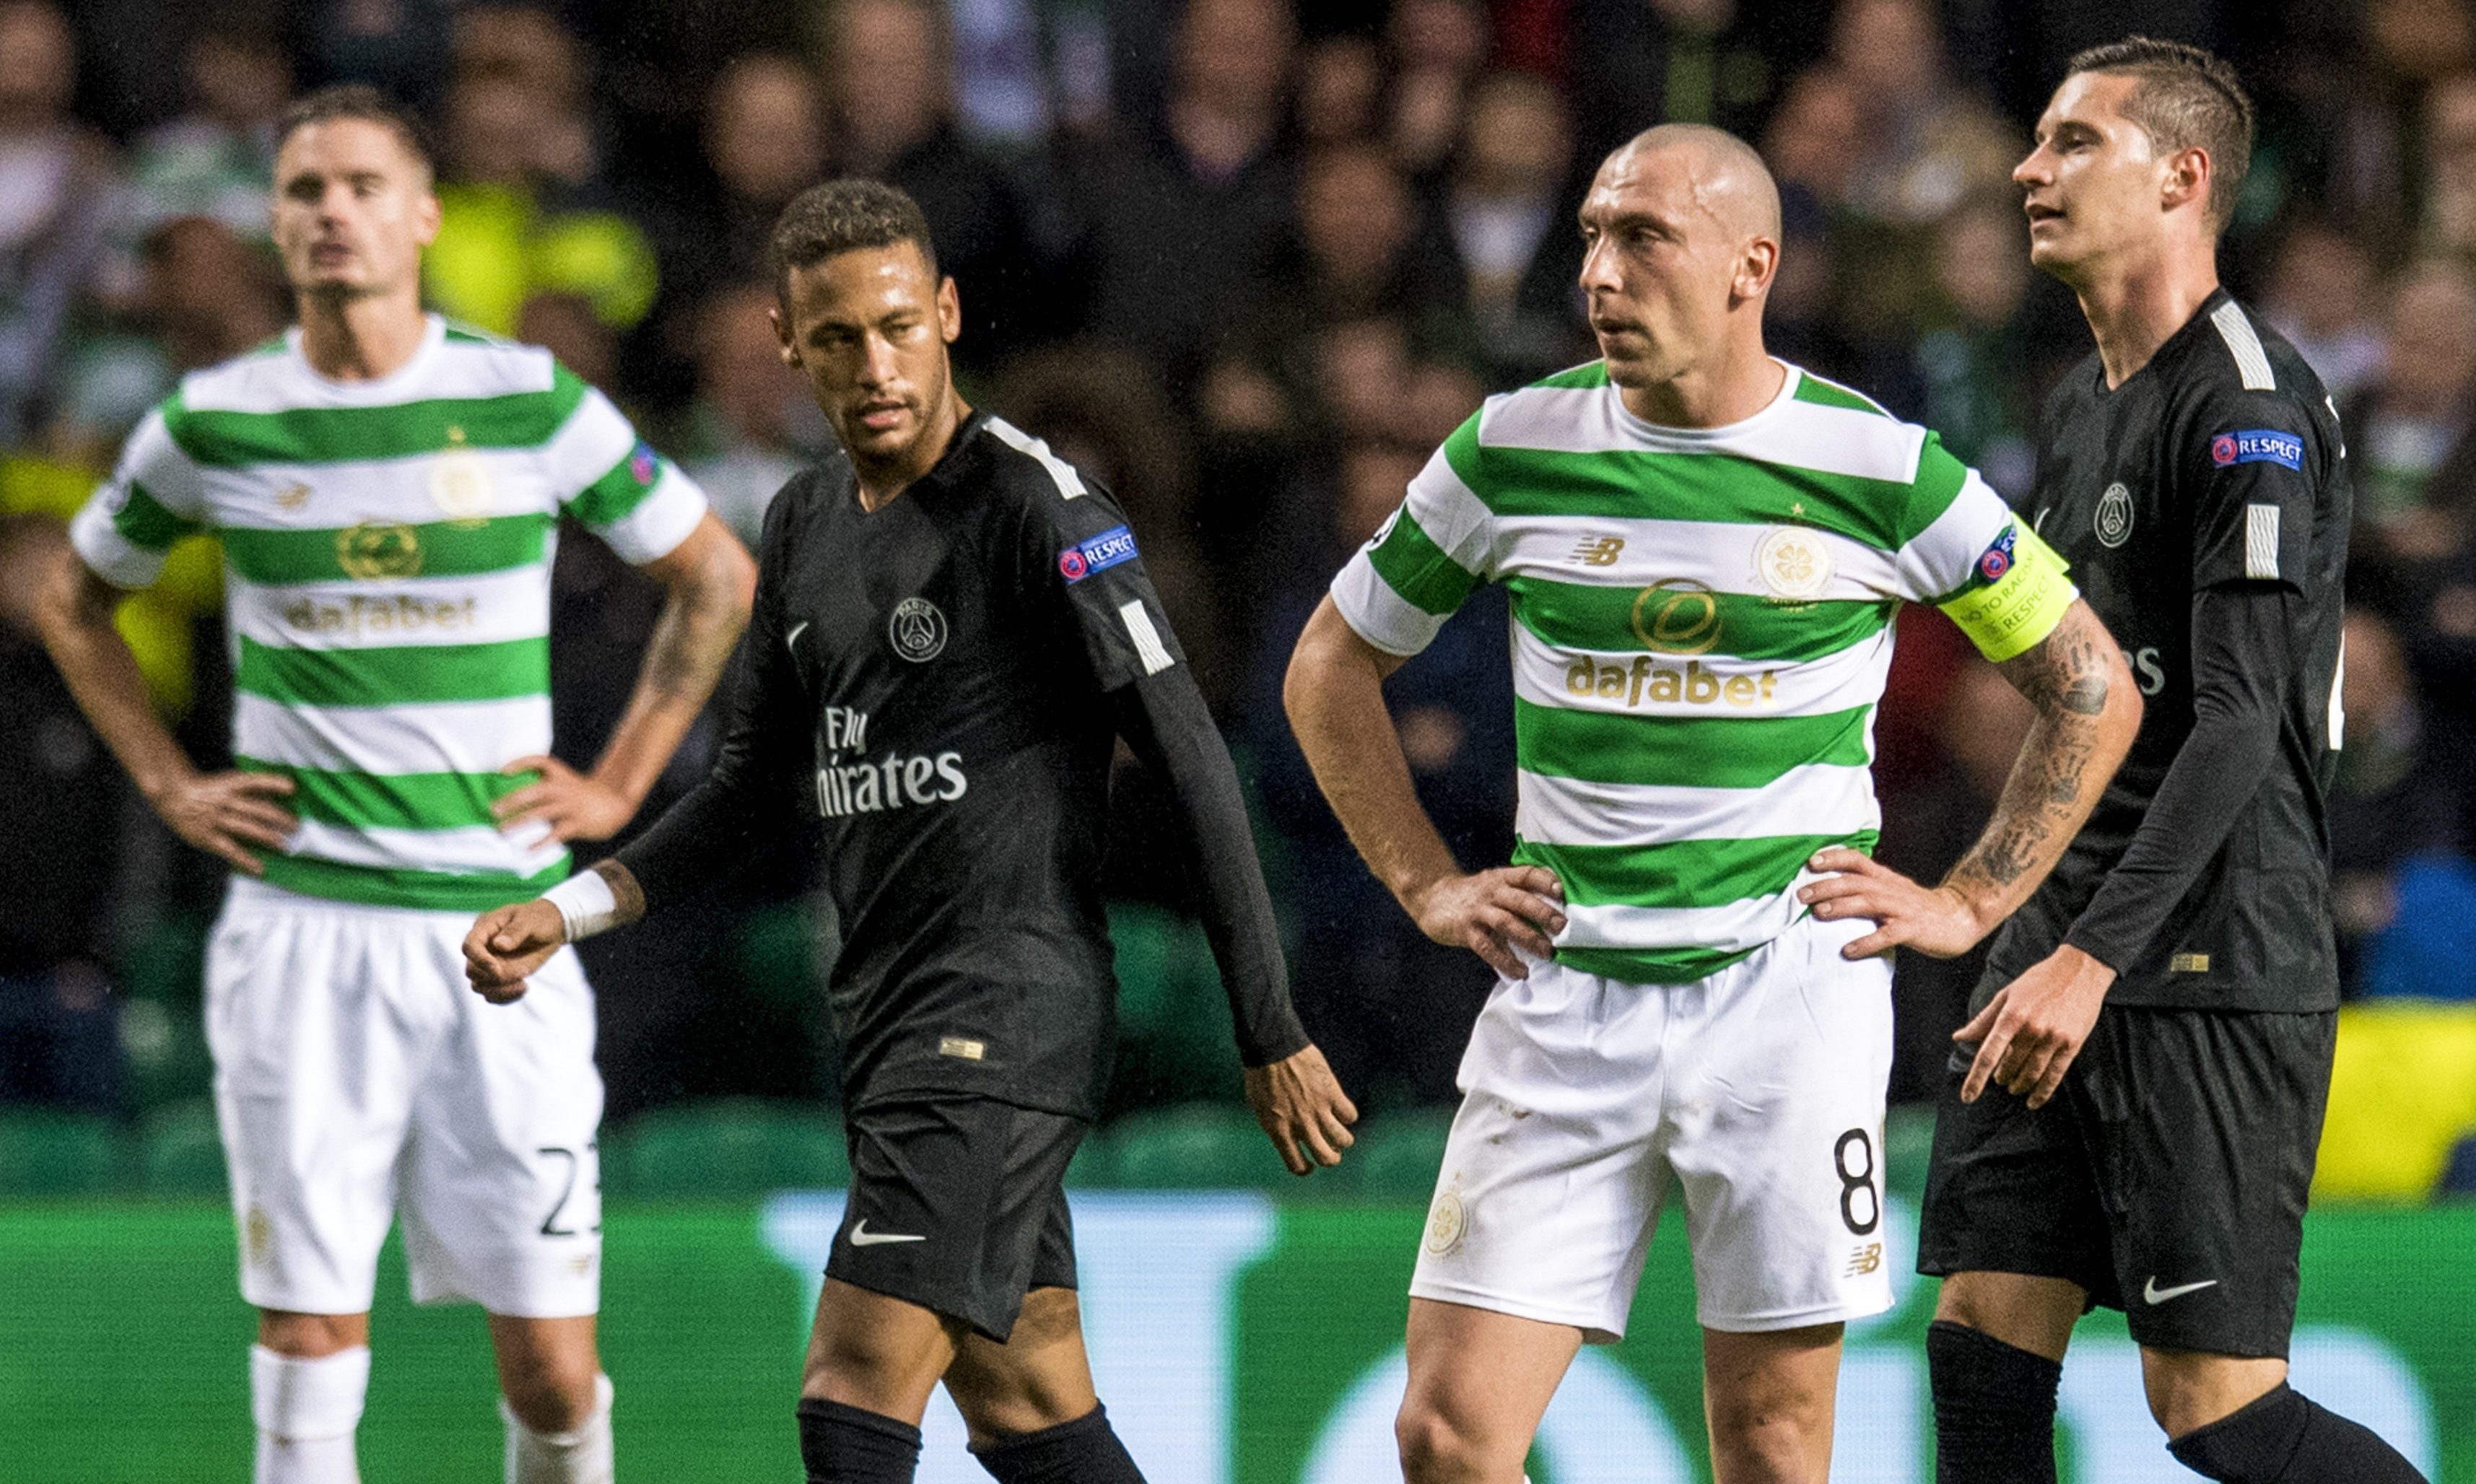 Dejection for Celtic's Scott Brown after his side concede again (SNS Group)